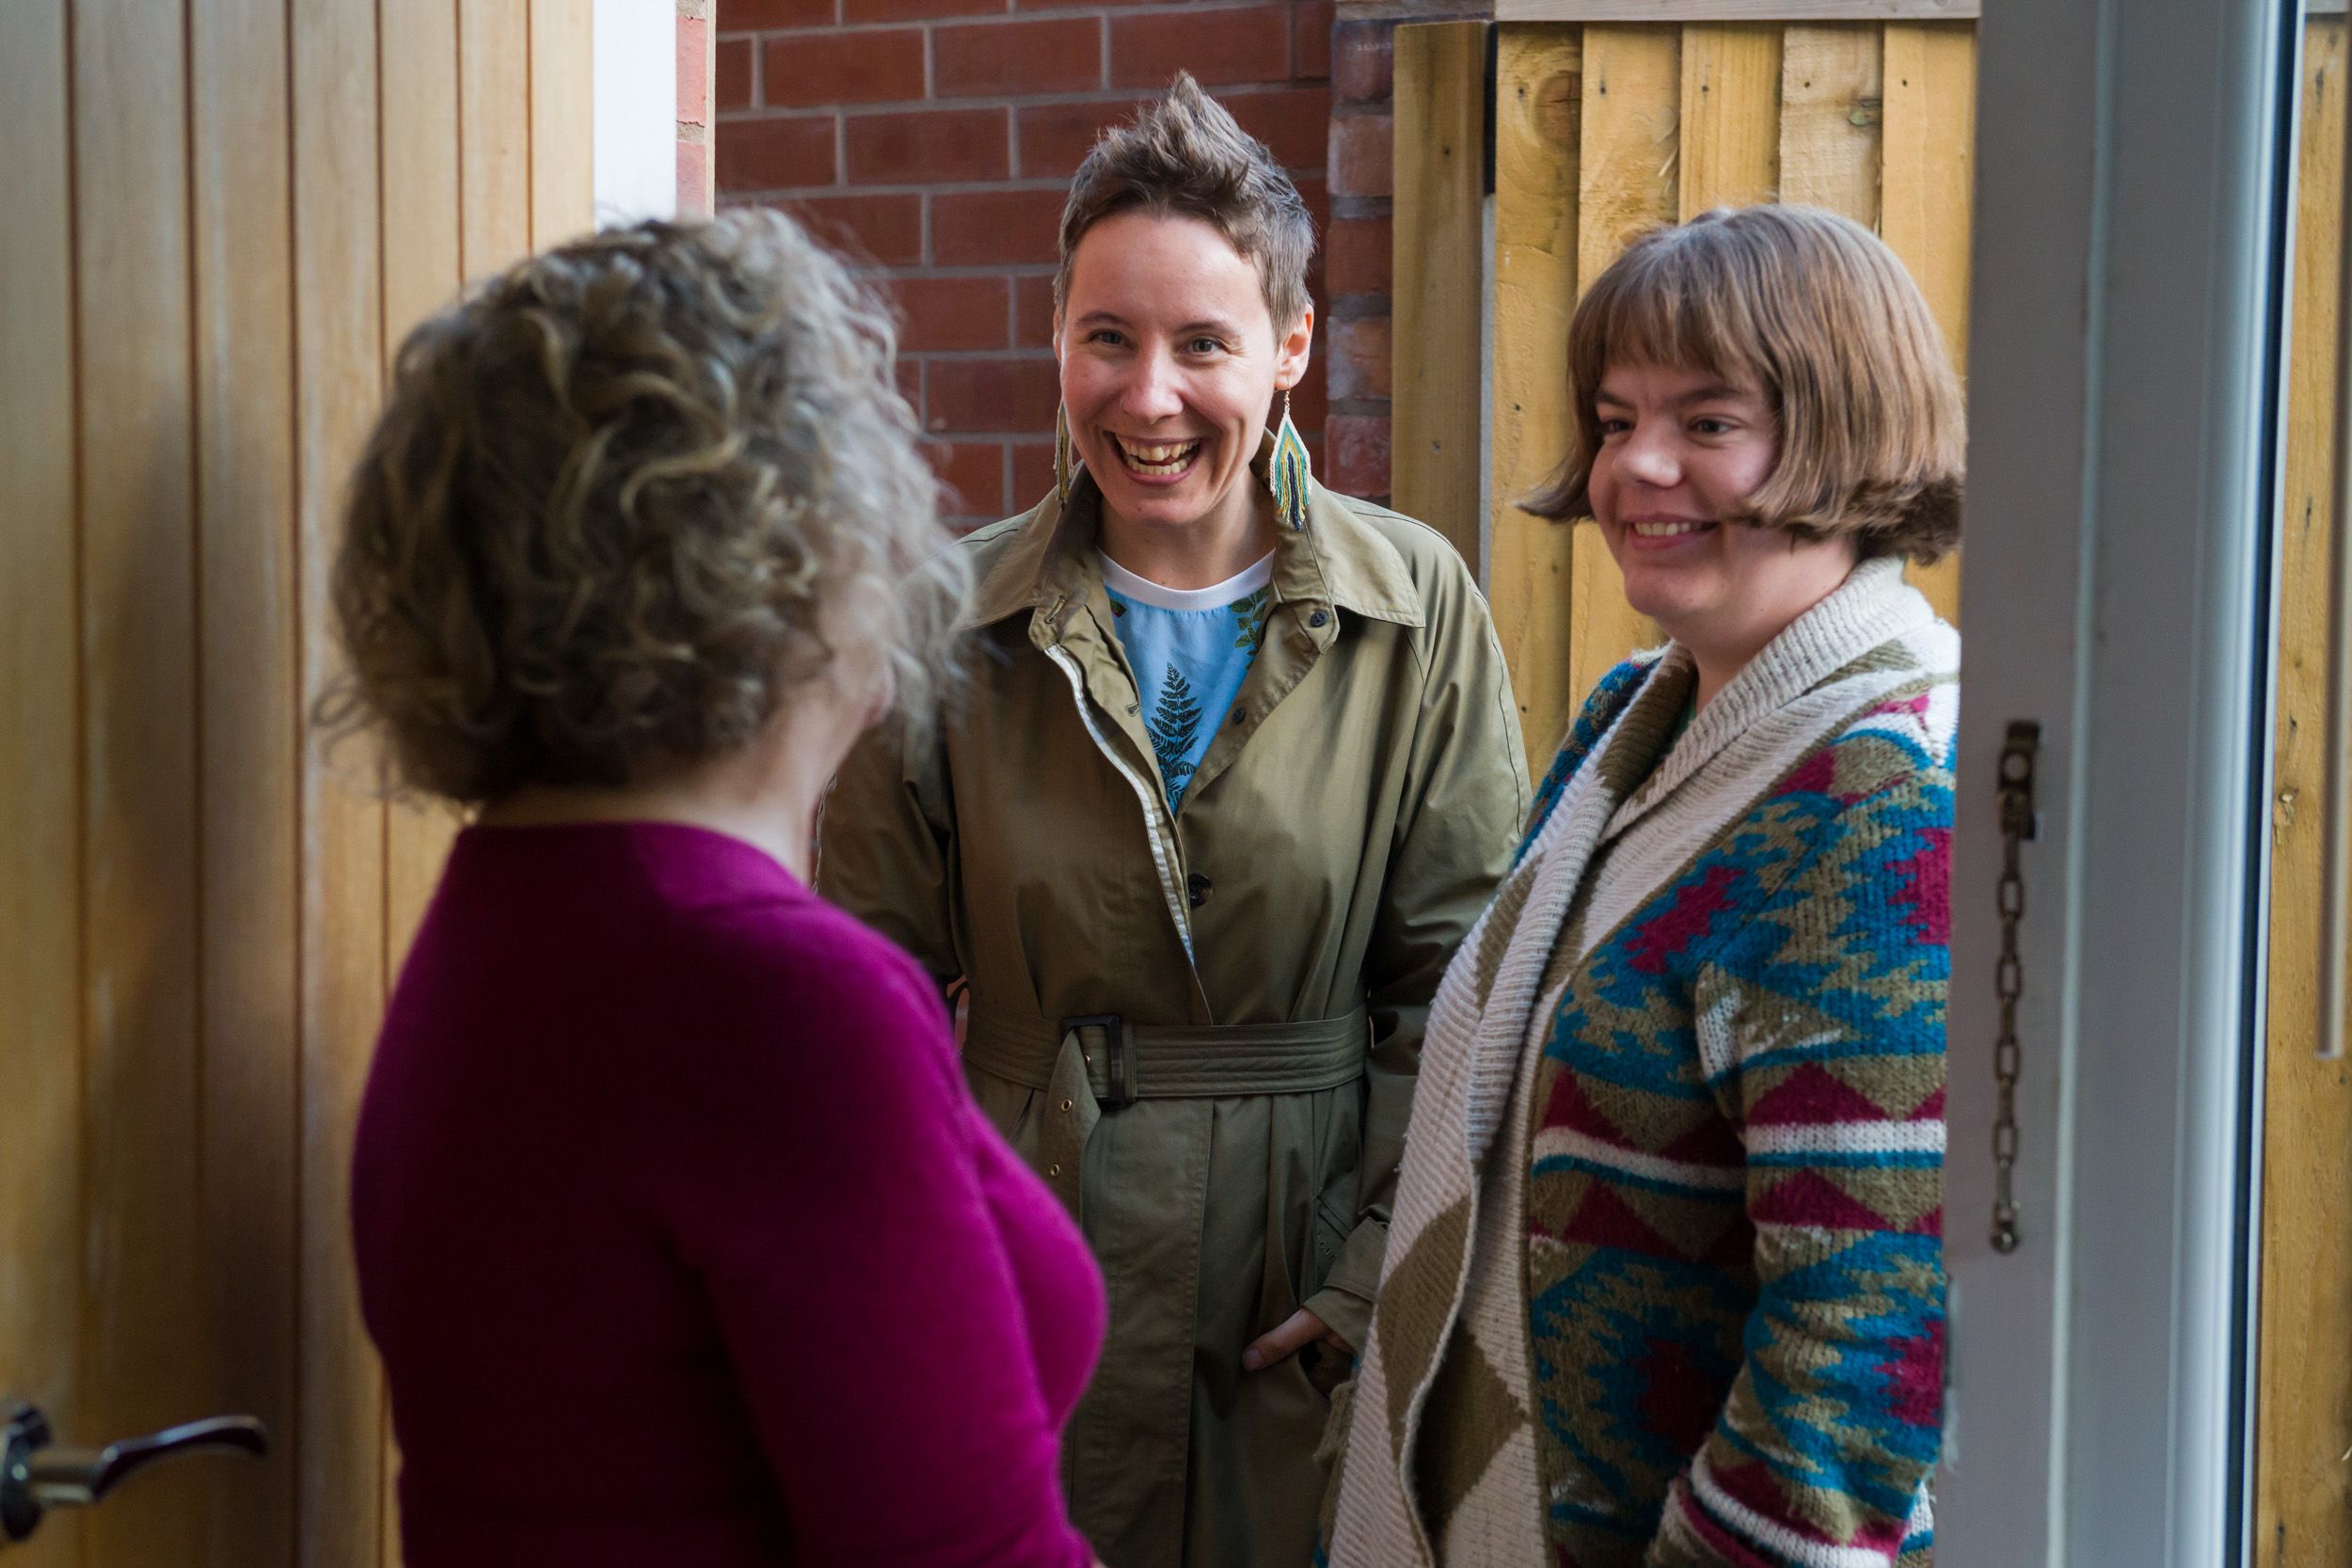 Open Homes Nottingham volunteers welcoming a young woman at the doorstep, providing support for homeless youth